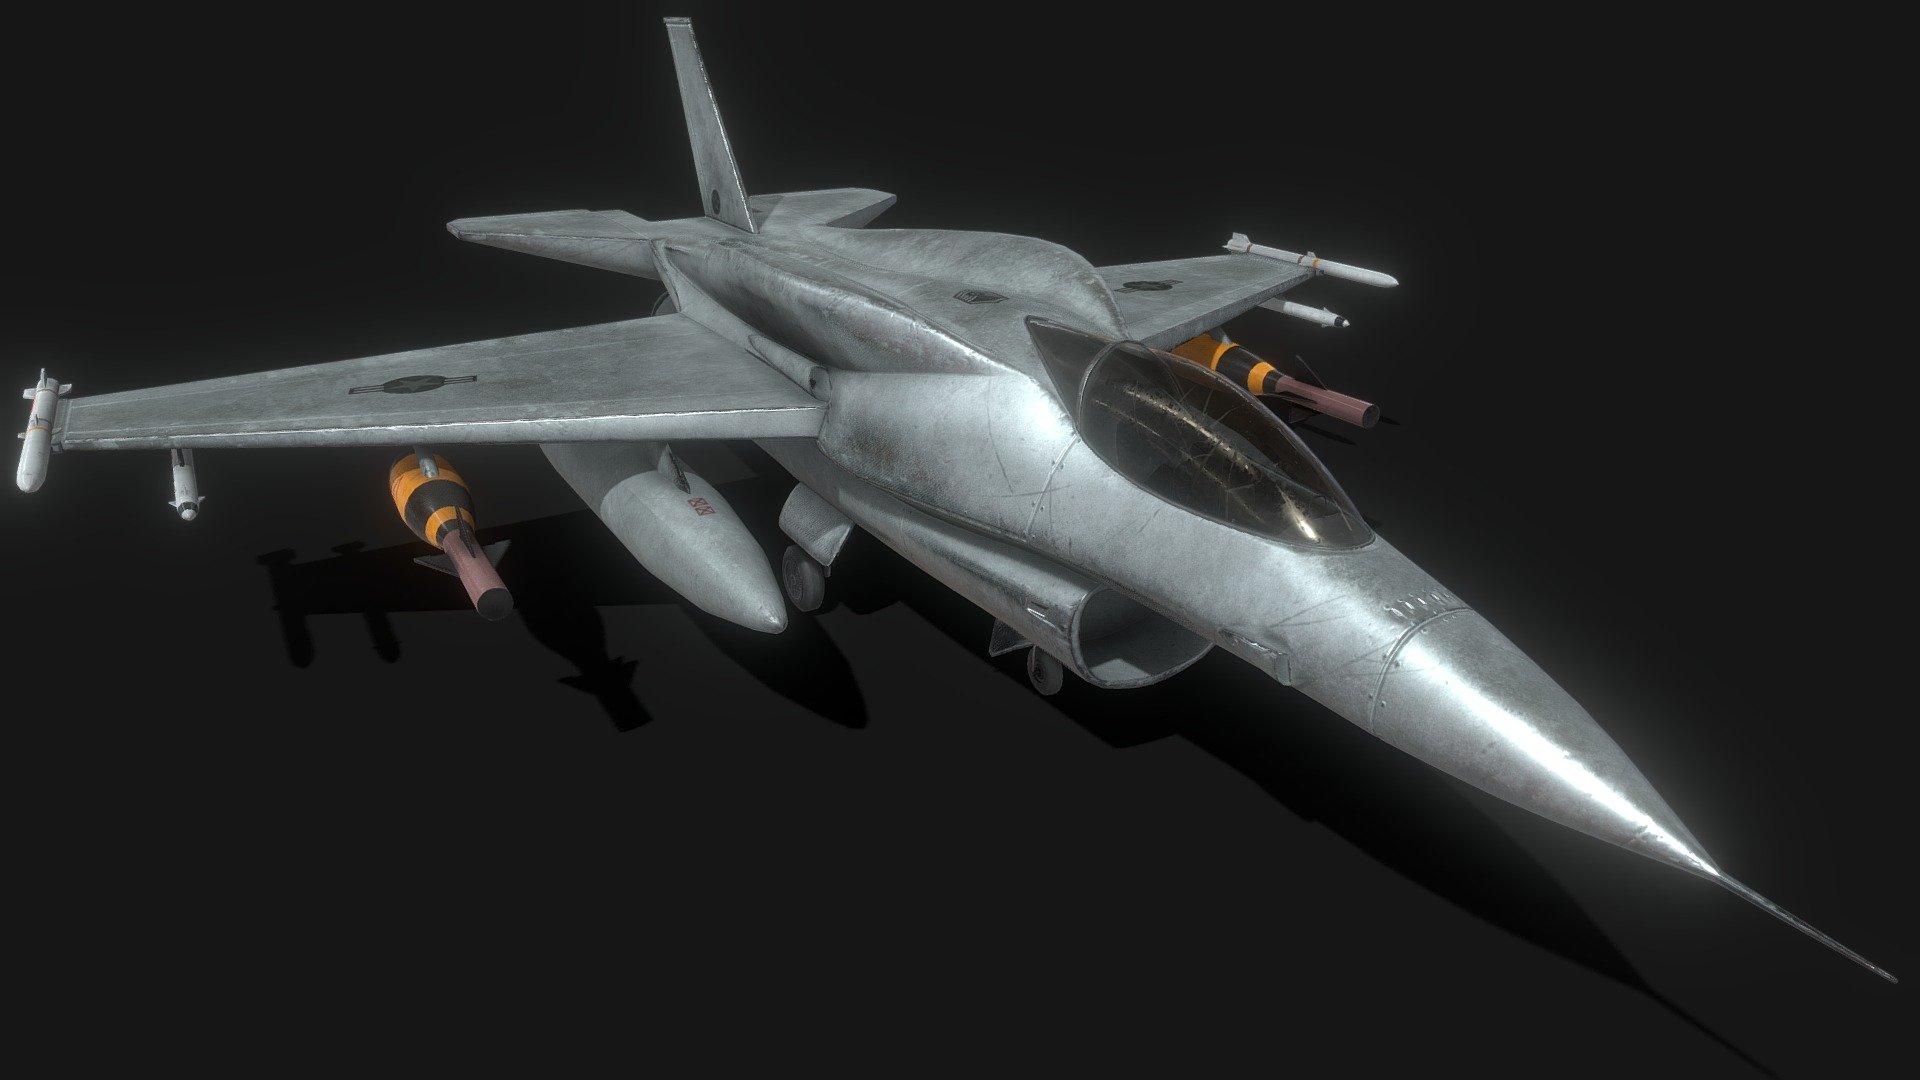 A realistic Fighter Jet!

This is a fictional model based on the F-16 Falcon.

The (S) is a totally new texture set for the body!

Designed for games in low-poly PBR and fully rigged and animated with landing gear, and interior cockpit with rigged controls. You can easily cover the screens with your own HD images or UI with a simple plane. 2 Shared materials for the Body, and cockpit in 4K PNG Format. Enjoy!!

31611 Triangles 3d model